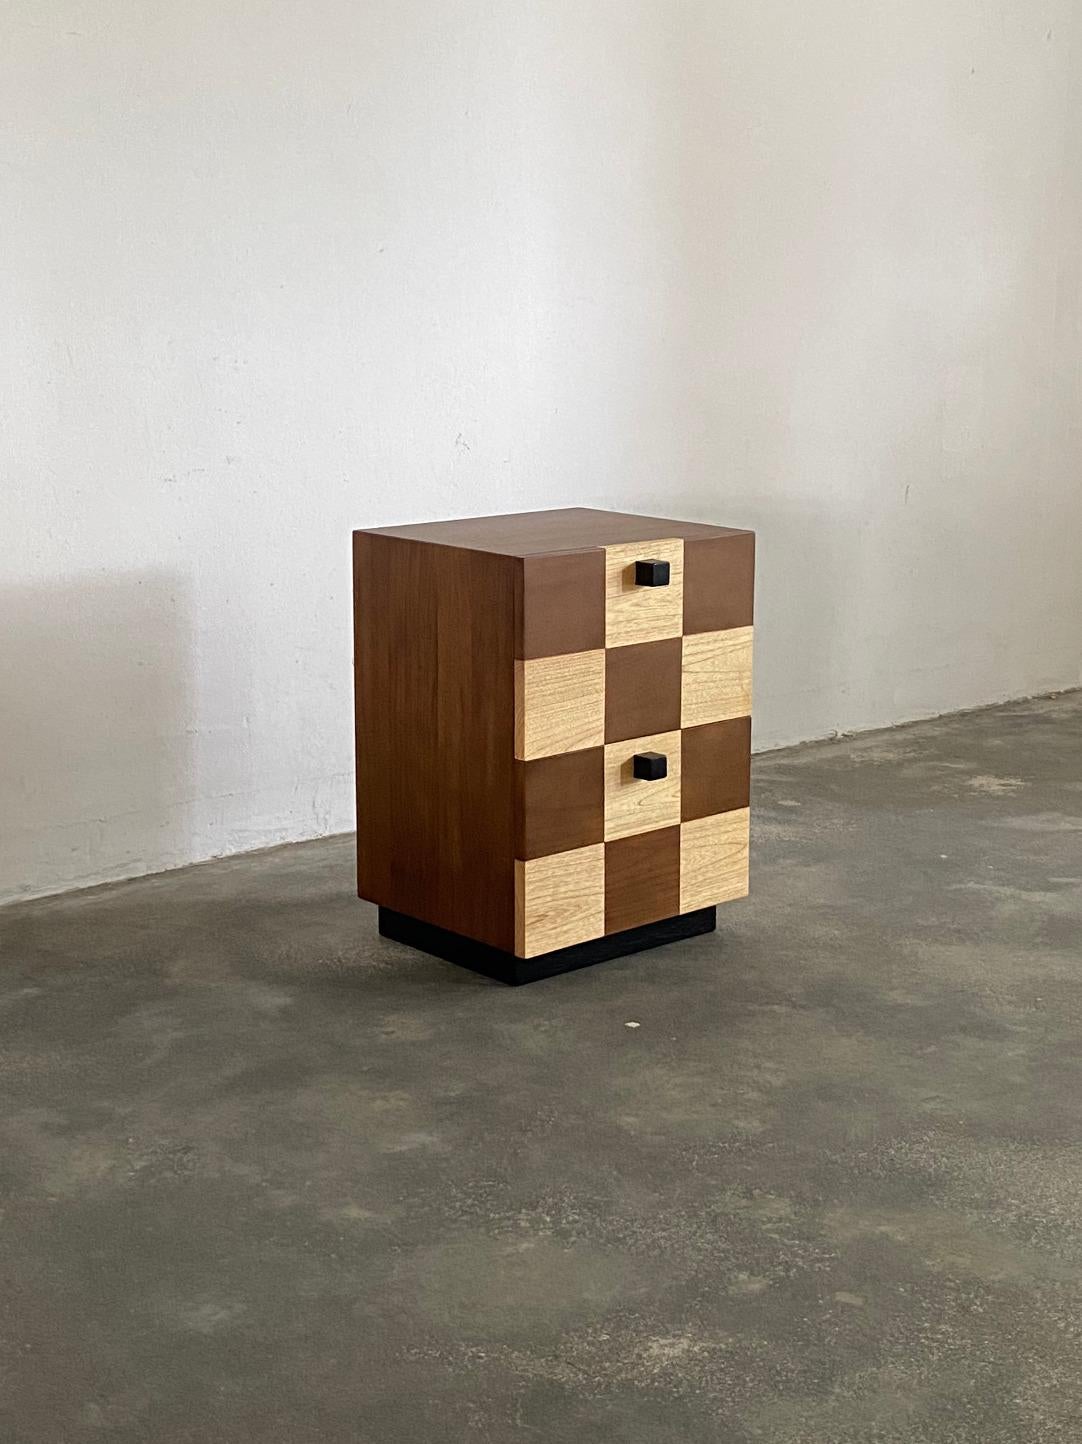 Coklat Side Table by Studio Kallang
Dimensions: W 40 x D 35 x H 55 cm
Materials: Solid Teak, Solid Sungkai. 

STUDIO KALLANG IS A SINGAPORE AND SEATTLE BASED PROJECT FOCUSING ON OBJECTS DESIGNED BY FAEZAH SHAHARUDDIN.
PIECES ARE PLAYFUL EXPLORATIONS